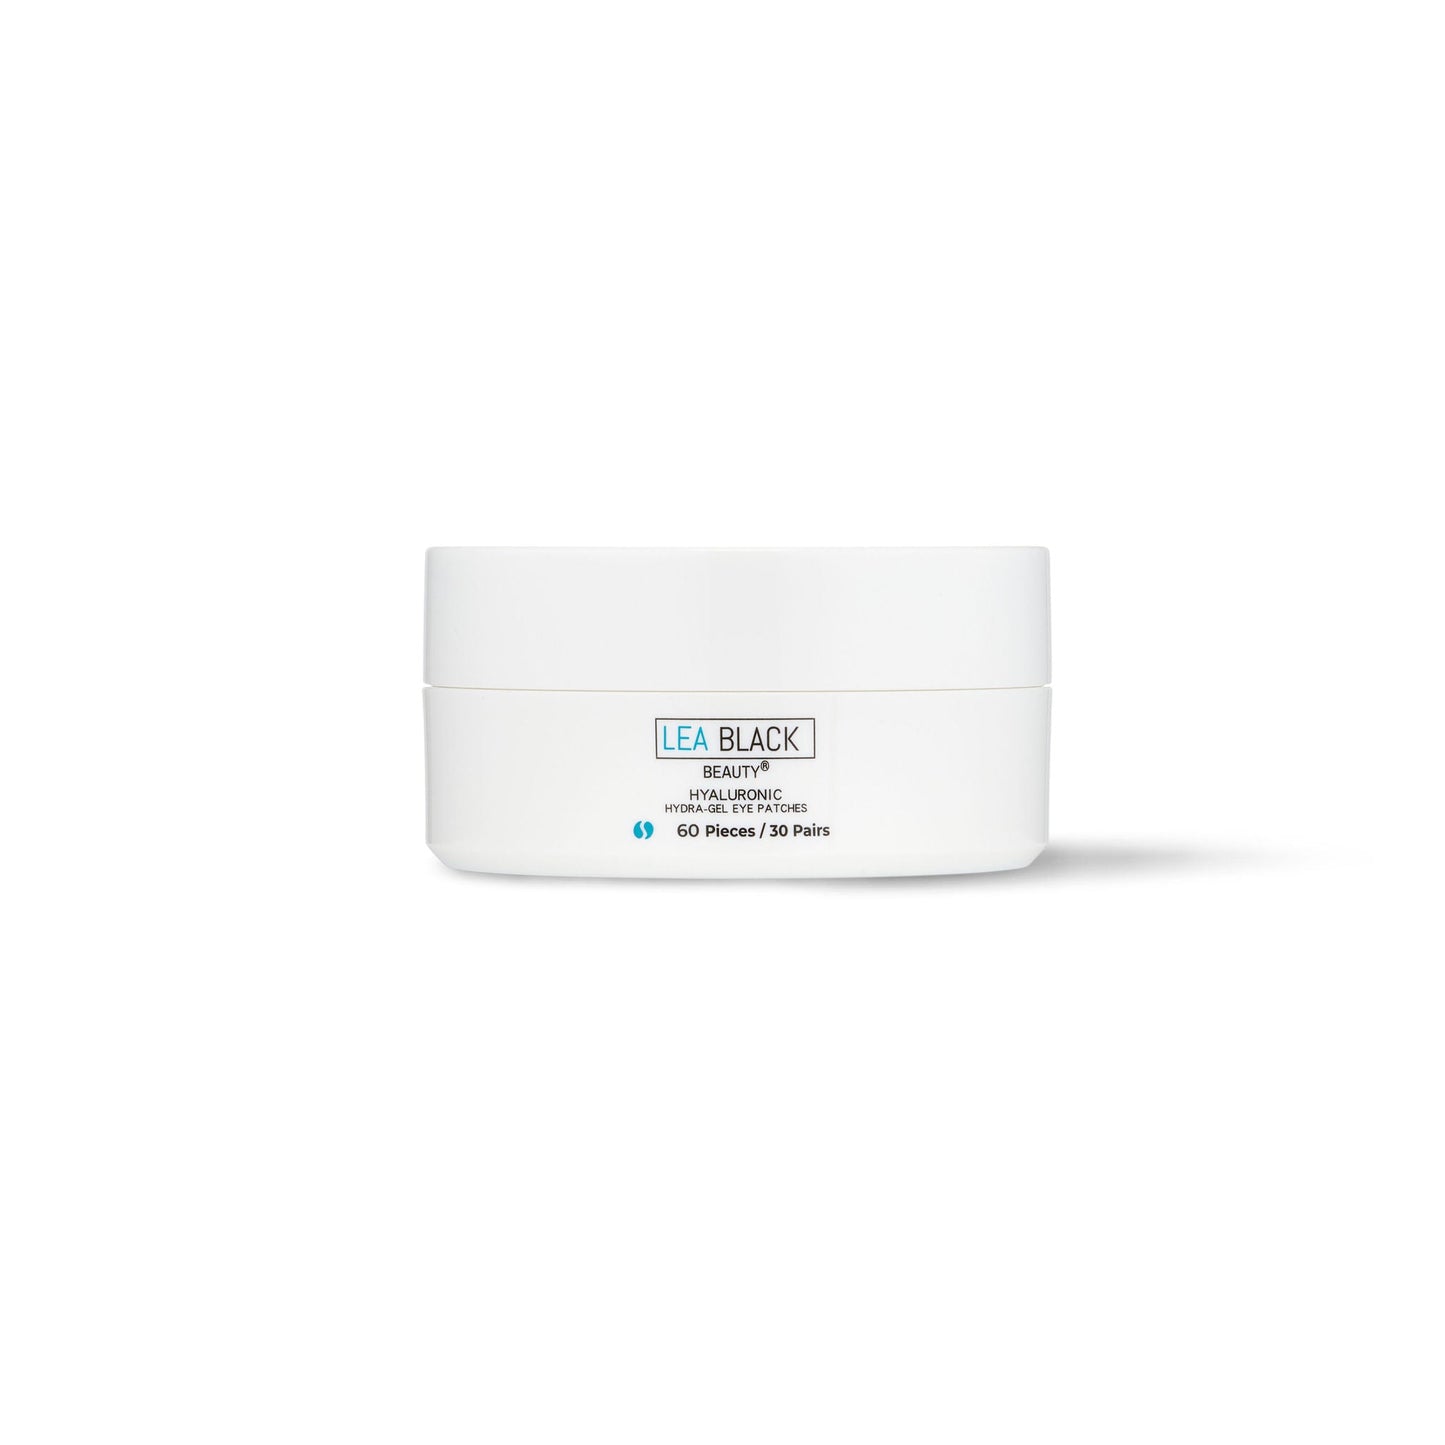 The front of a container of Lea Black Beauty® Hyaluronic Hydra-Gel Eye Patches